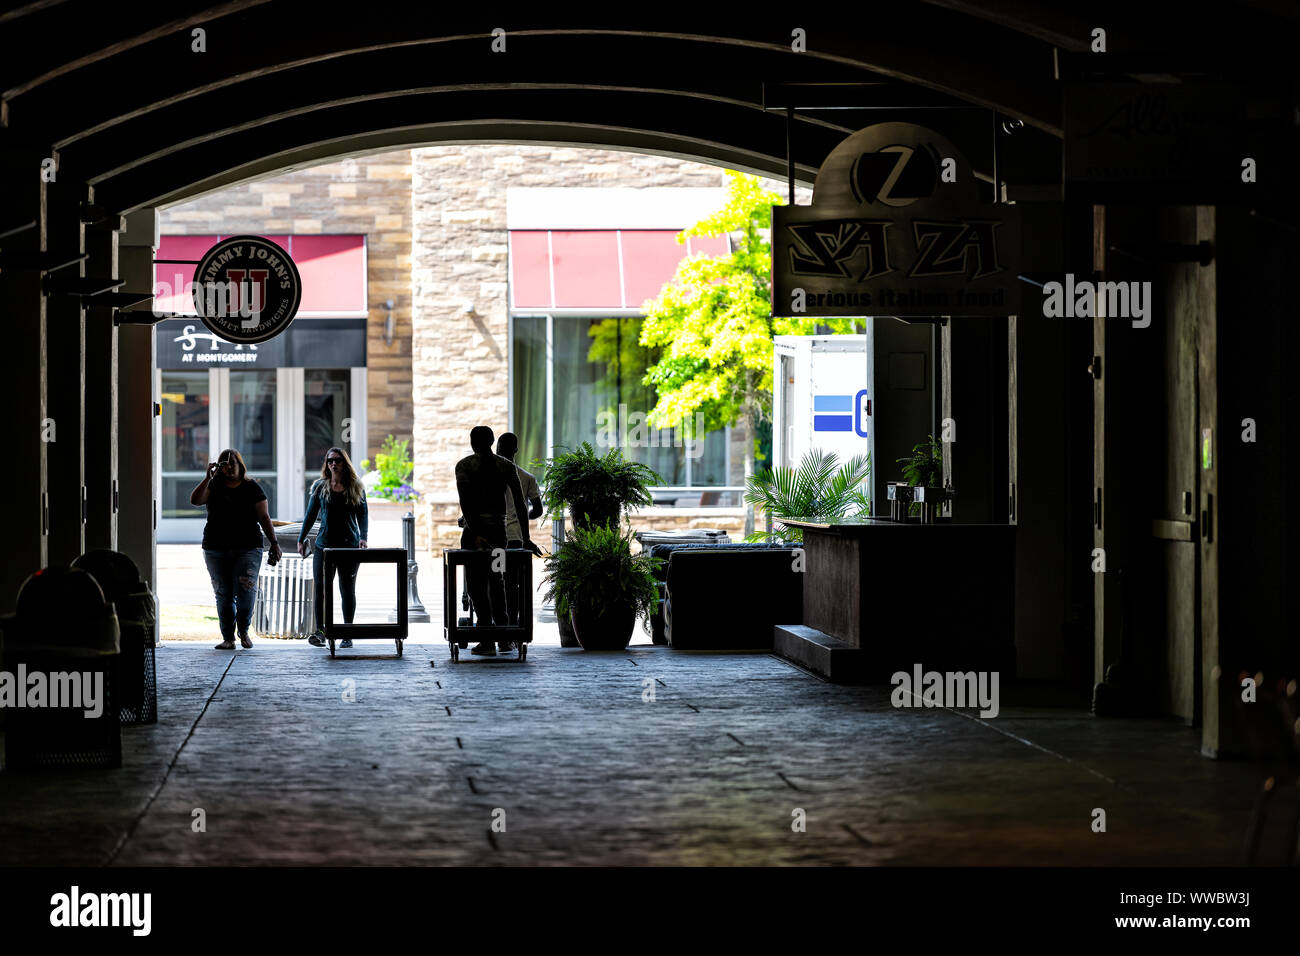 Montgomery, USA - April 21, 2018: The Alley tunnel or passage with people walking by Jimmy John's gourmet sandwich shop, Sa Za Italian restaurant in A Stock Photo